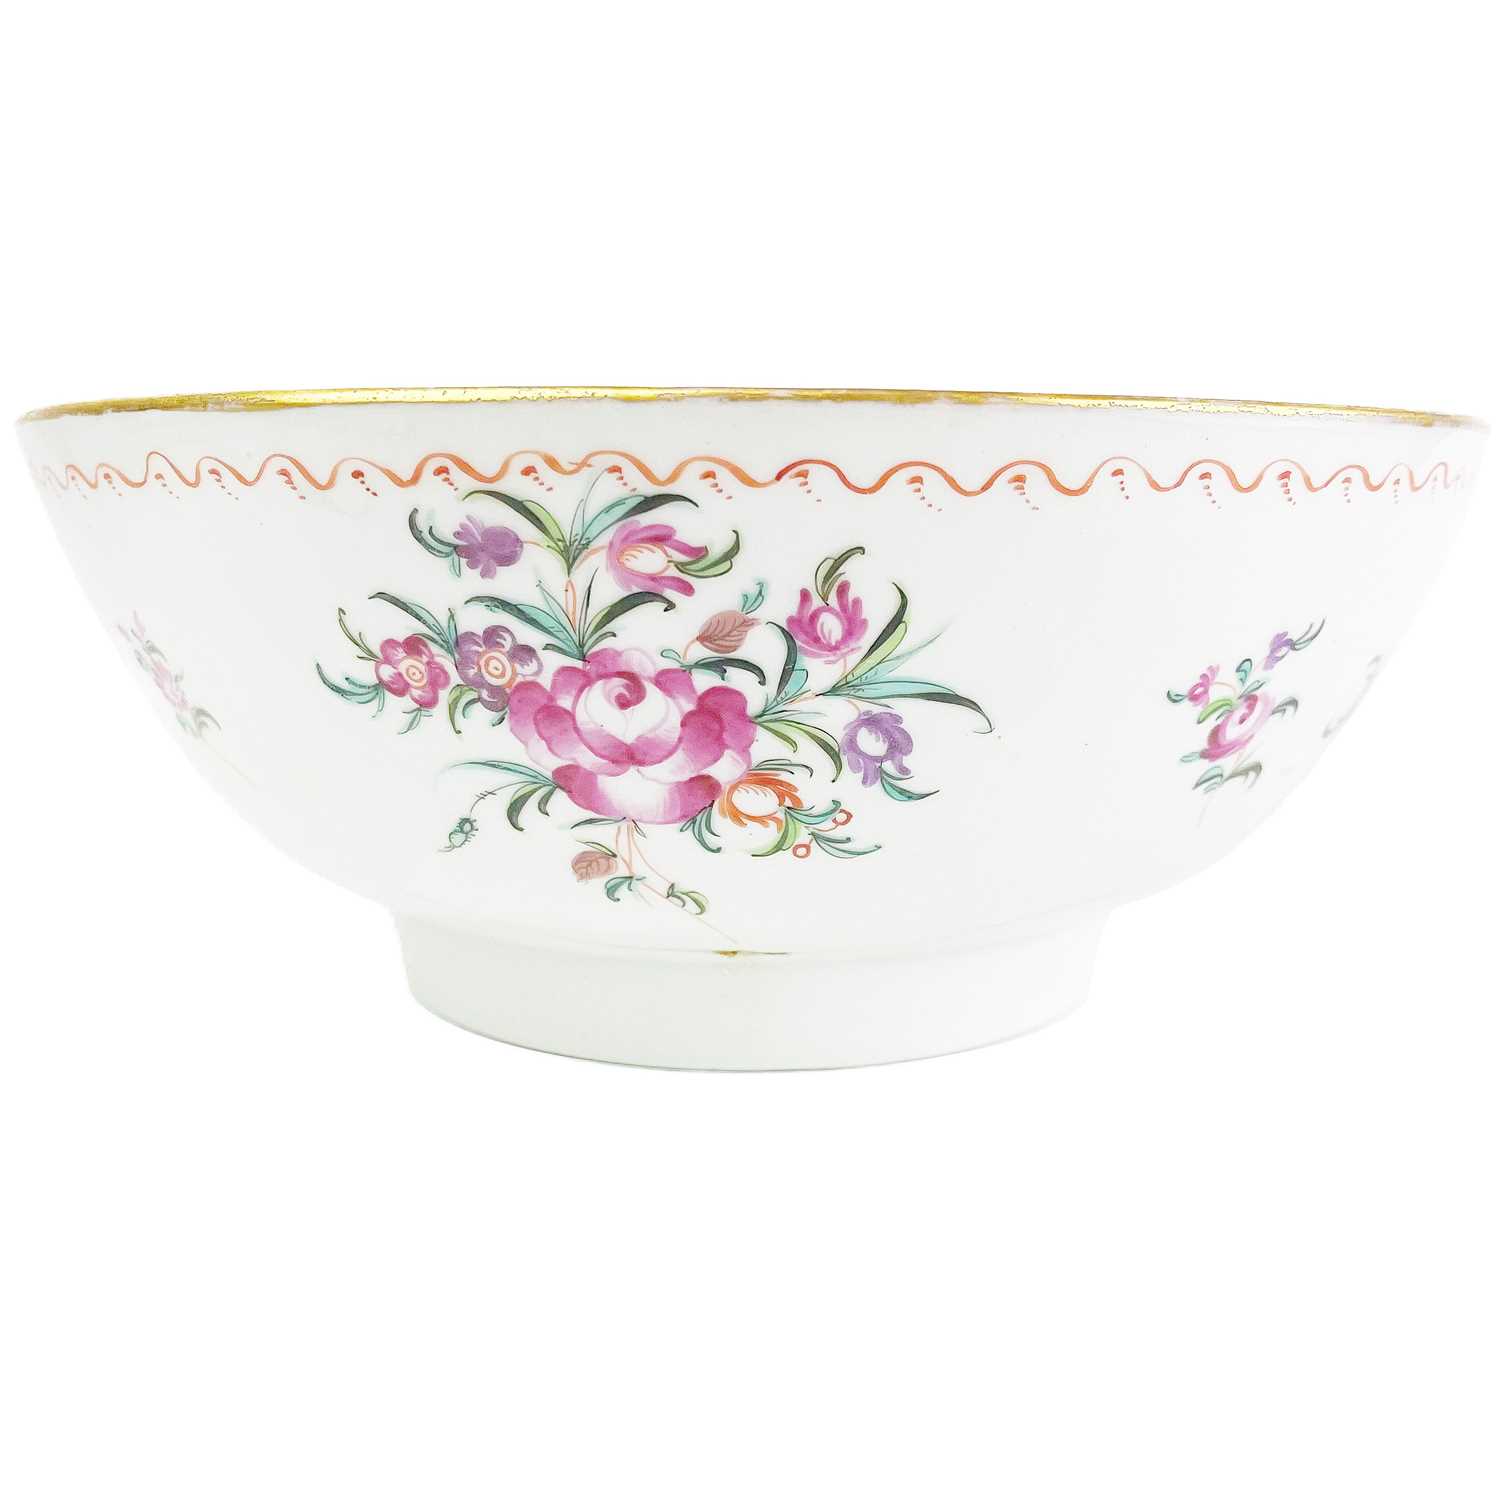 A large Chinese famille rose porcelain bowl, 18th century, - Image 2 of 5